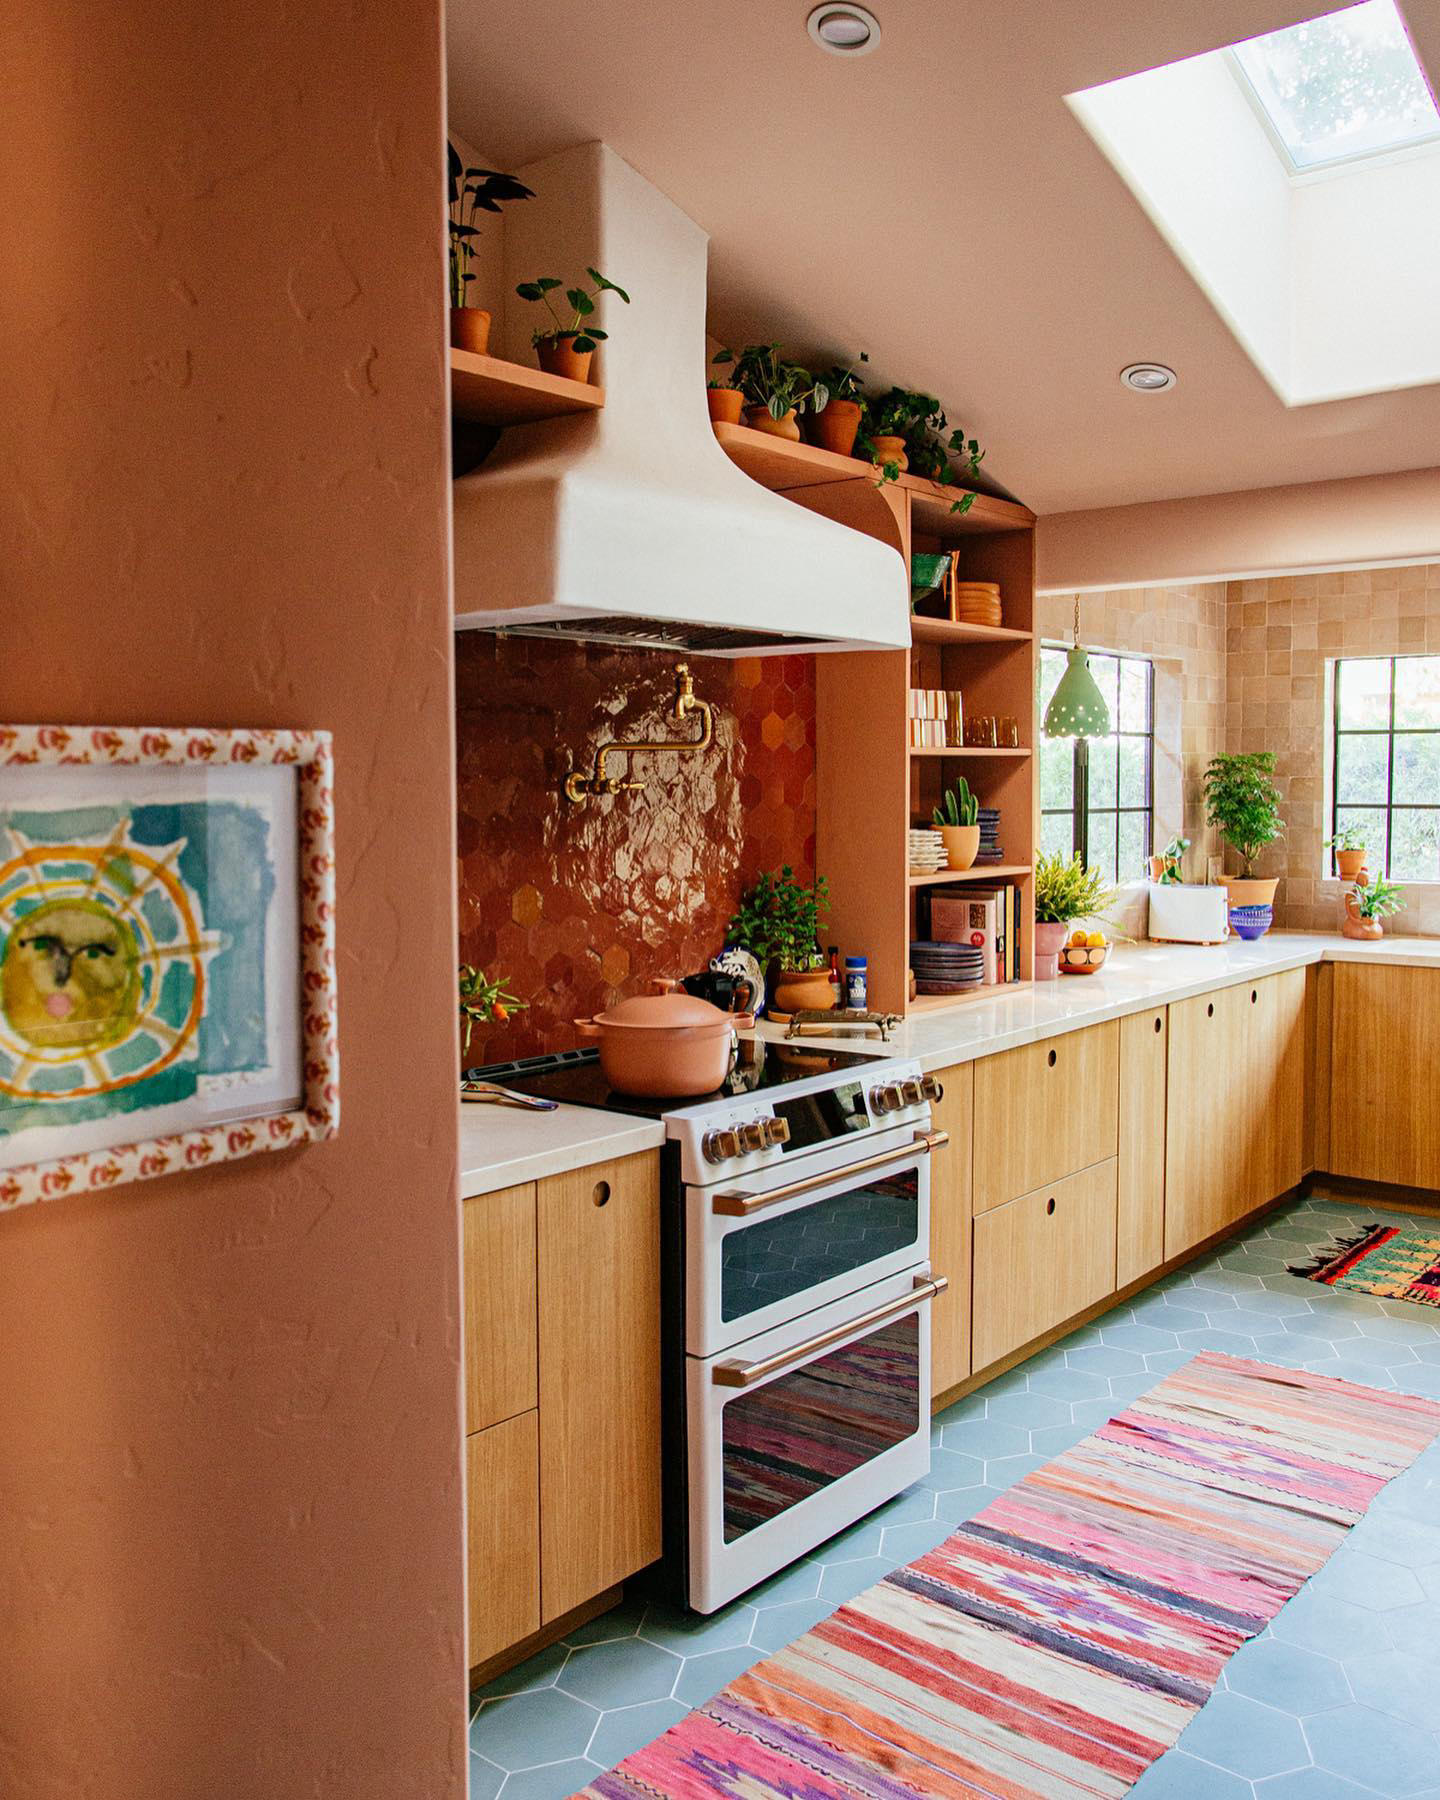 Justina Blakeney - #ad I wanted our #jungalowbythemountain kitchen to harness a ton of natural light